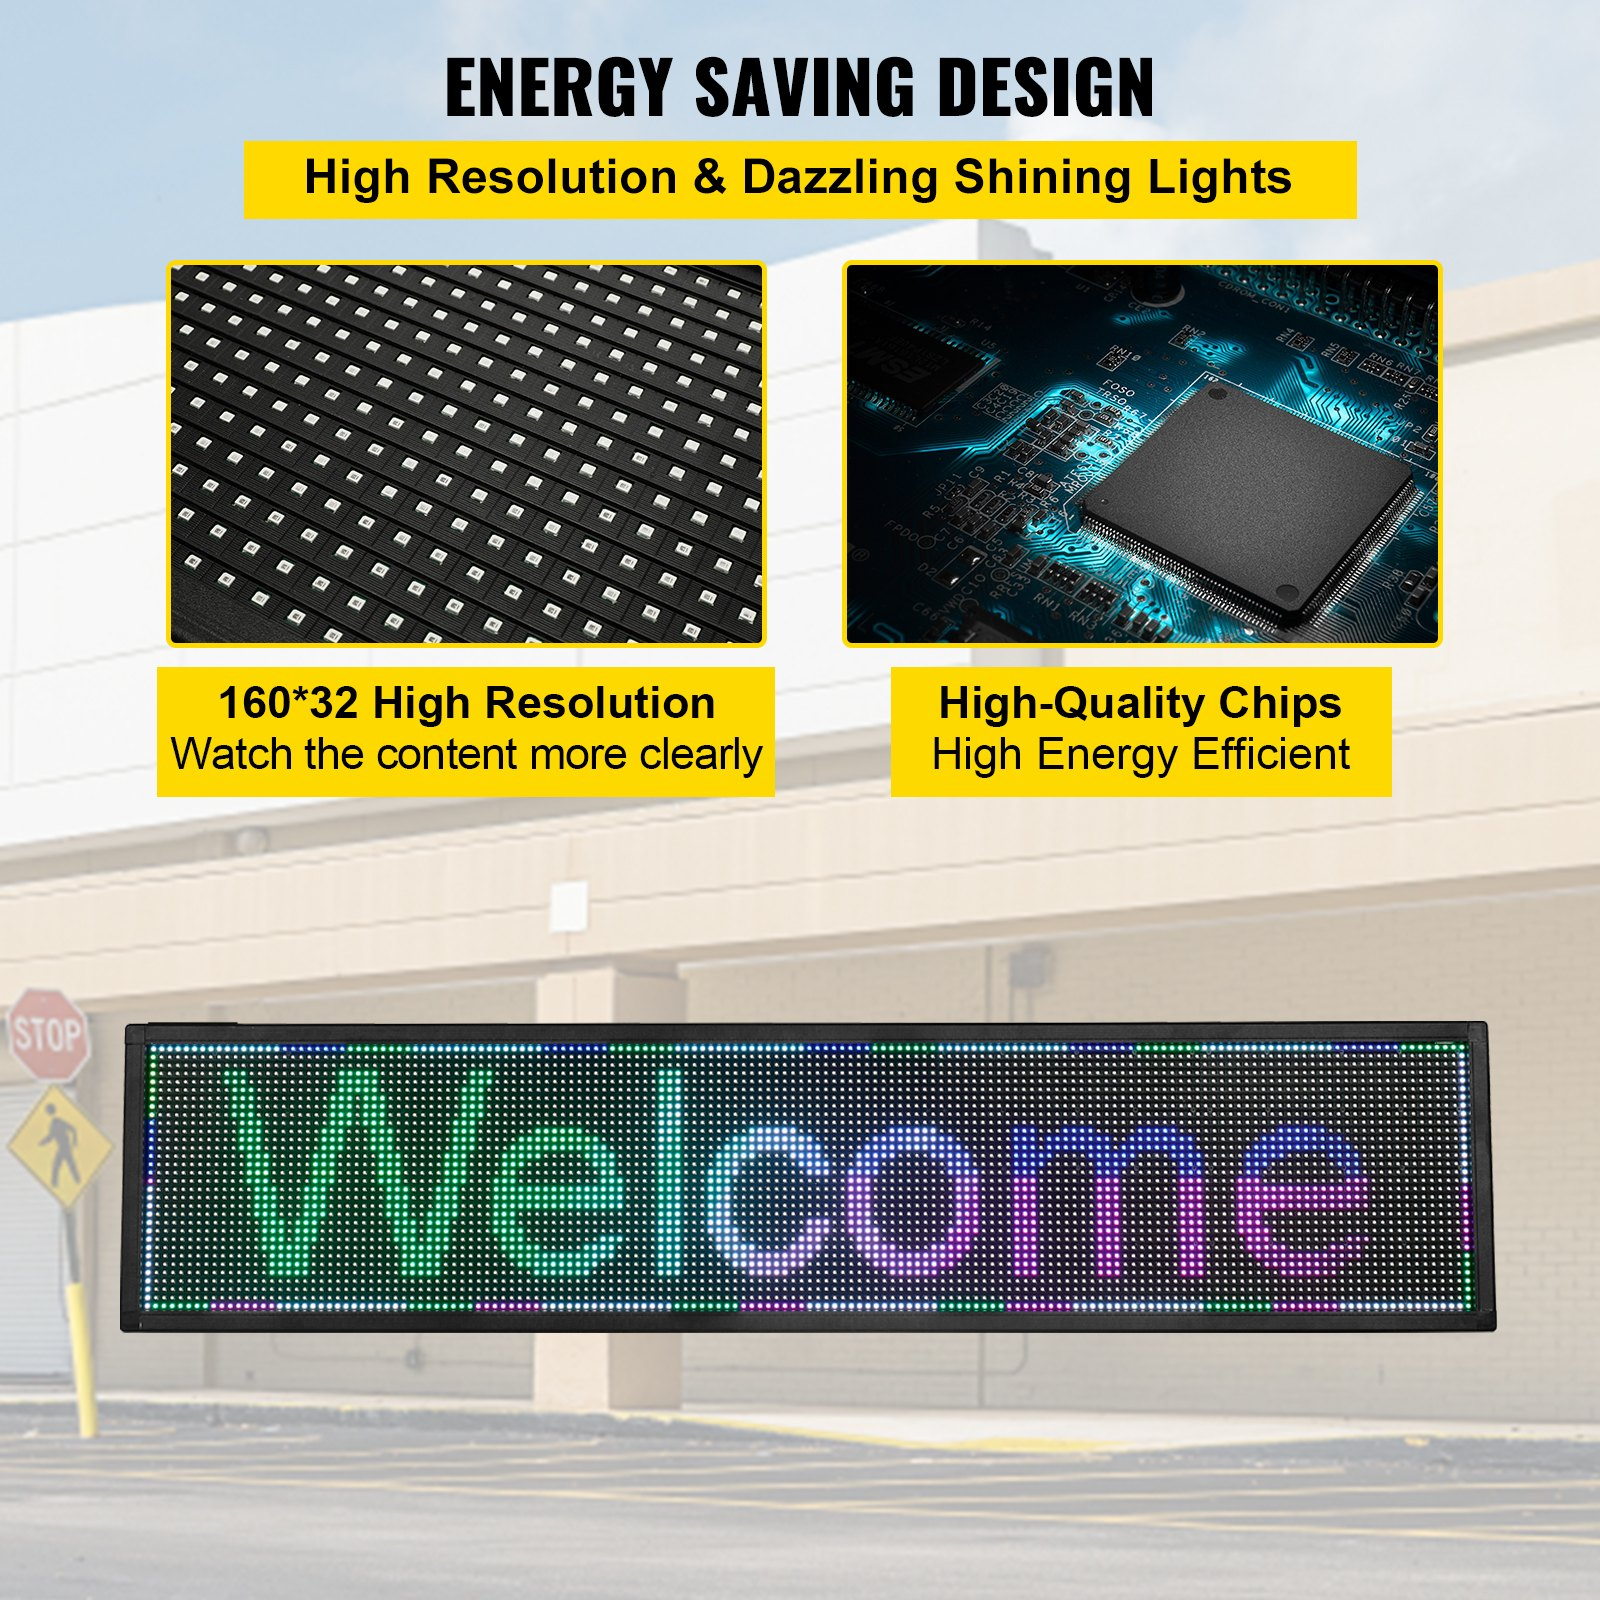 VEVOR LED Scrolling Sign, 40" x 9" WiFi & USB Control, Full Color P6 Programmable Display, Indoor High Resolution Message Board, High Brightness Electronic Sign, Perfect Solution for Advertising, Goodies N Stuff